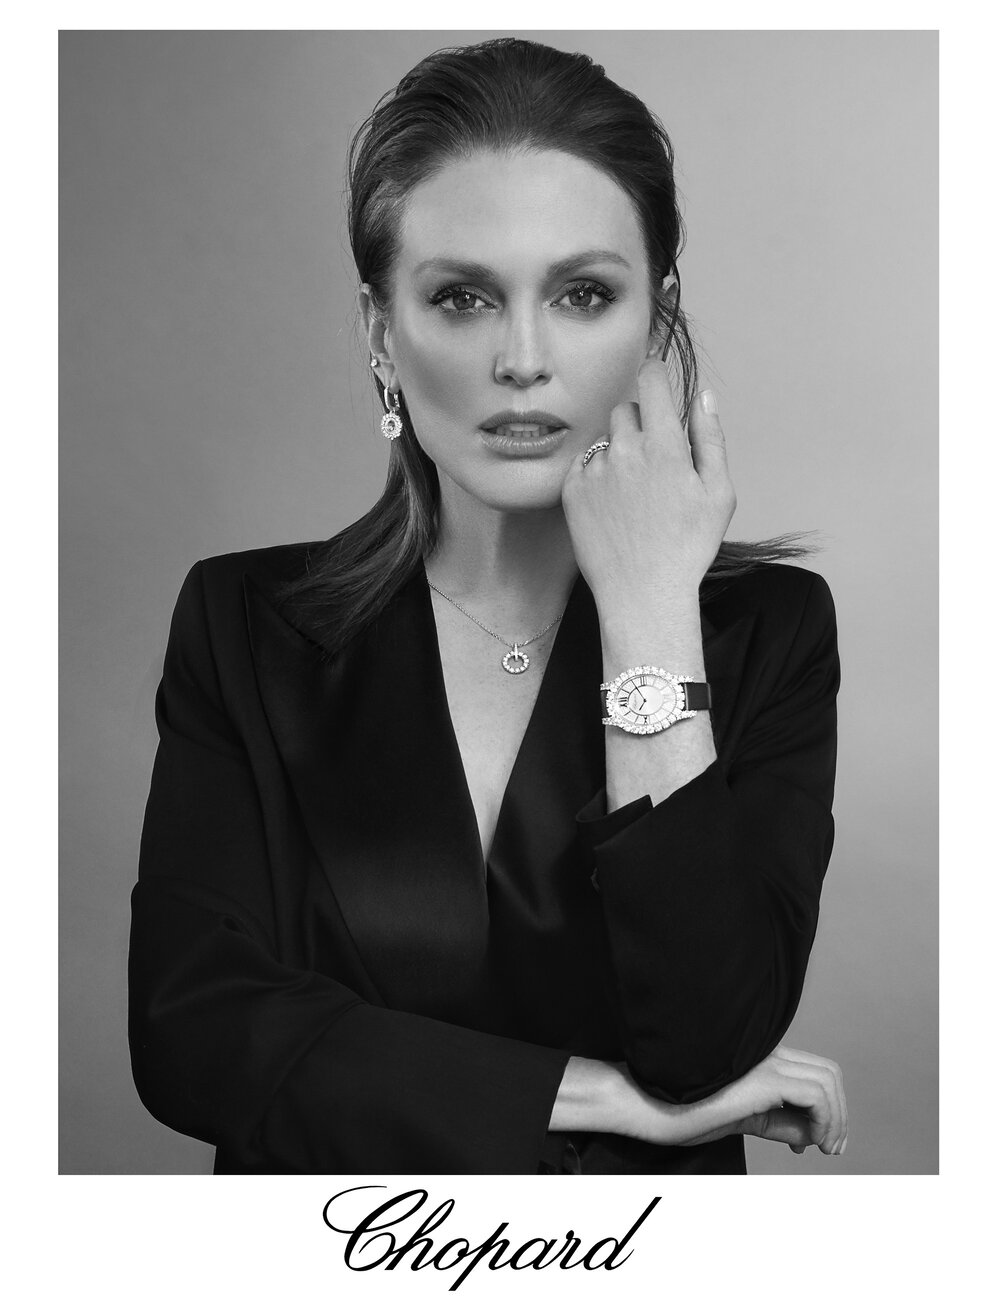 Chopard 1 by Andreas ORTNER